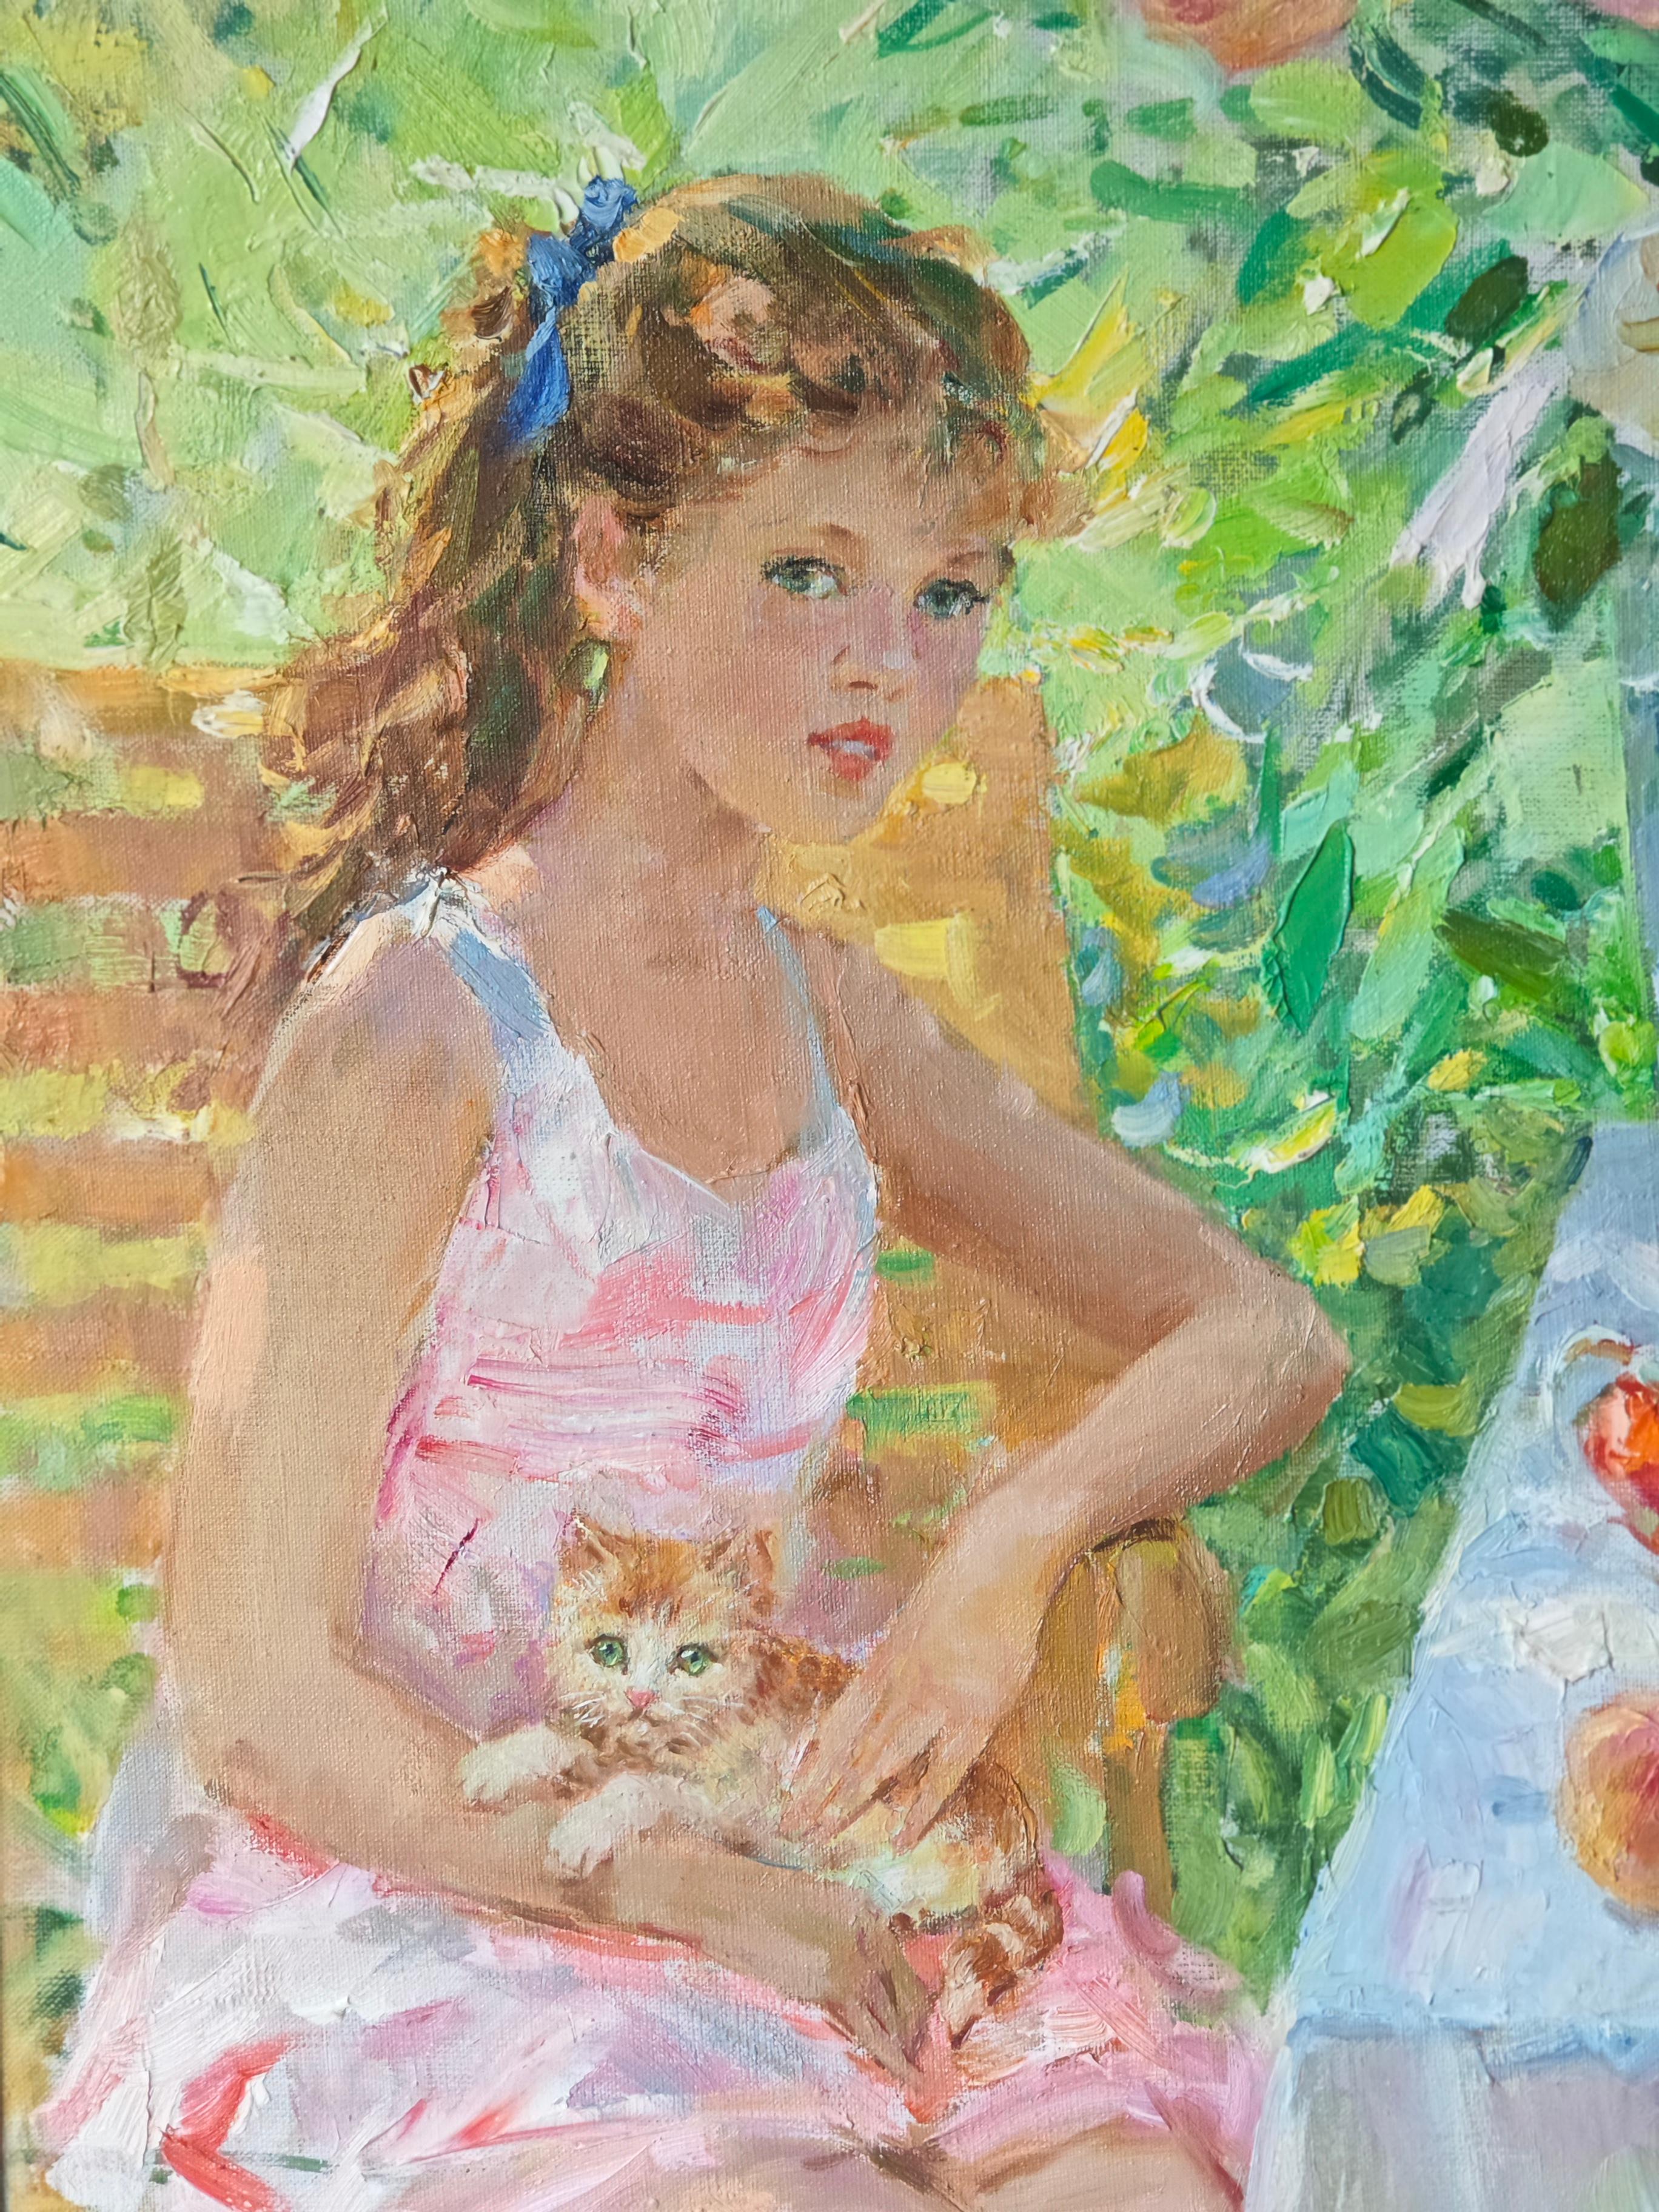 Portrait of a Young Girl holding a Kitten, seated in a Summer Garden - Impressionist Painting by Valentin Danilovitch Bernadski